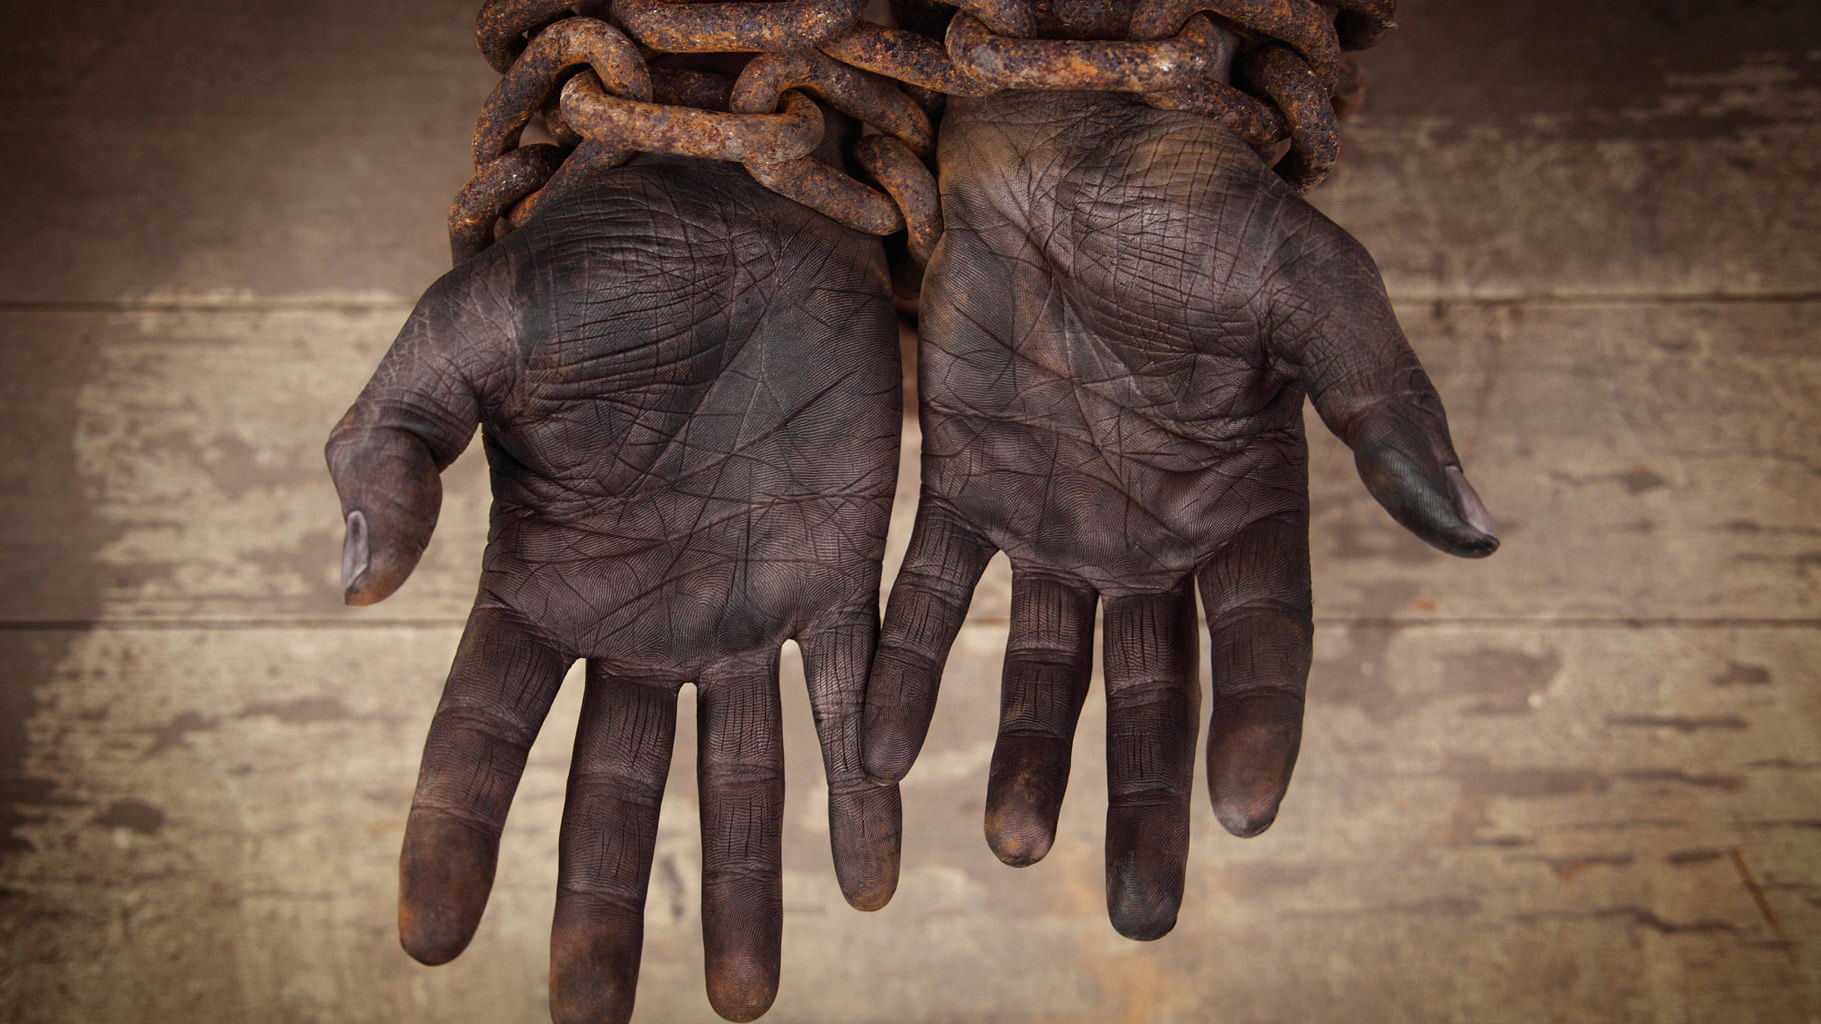 

Emmanuel Edet, 61, and Antan Edet, 58, were sentenced at Harrow Crown Court in London for six years each, for keeping a Nigerian immigrant as a slave for more than two decades. (Photo: iStockphoto)